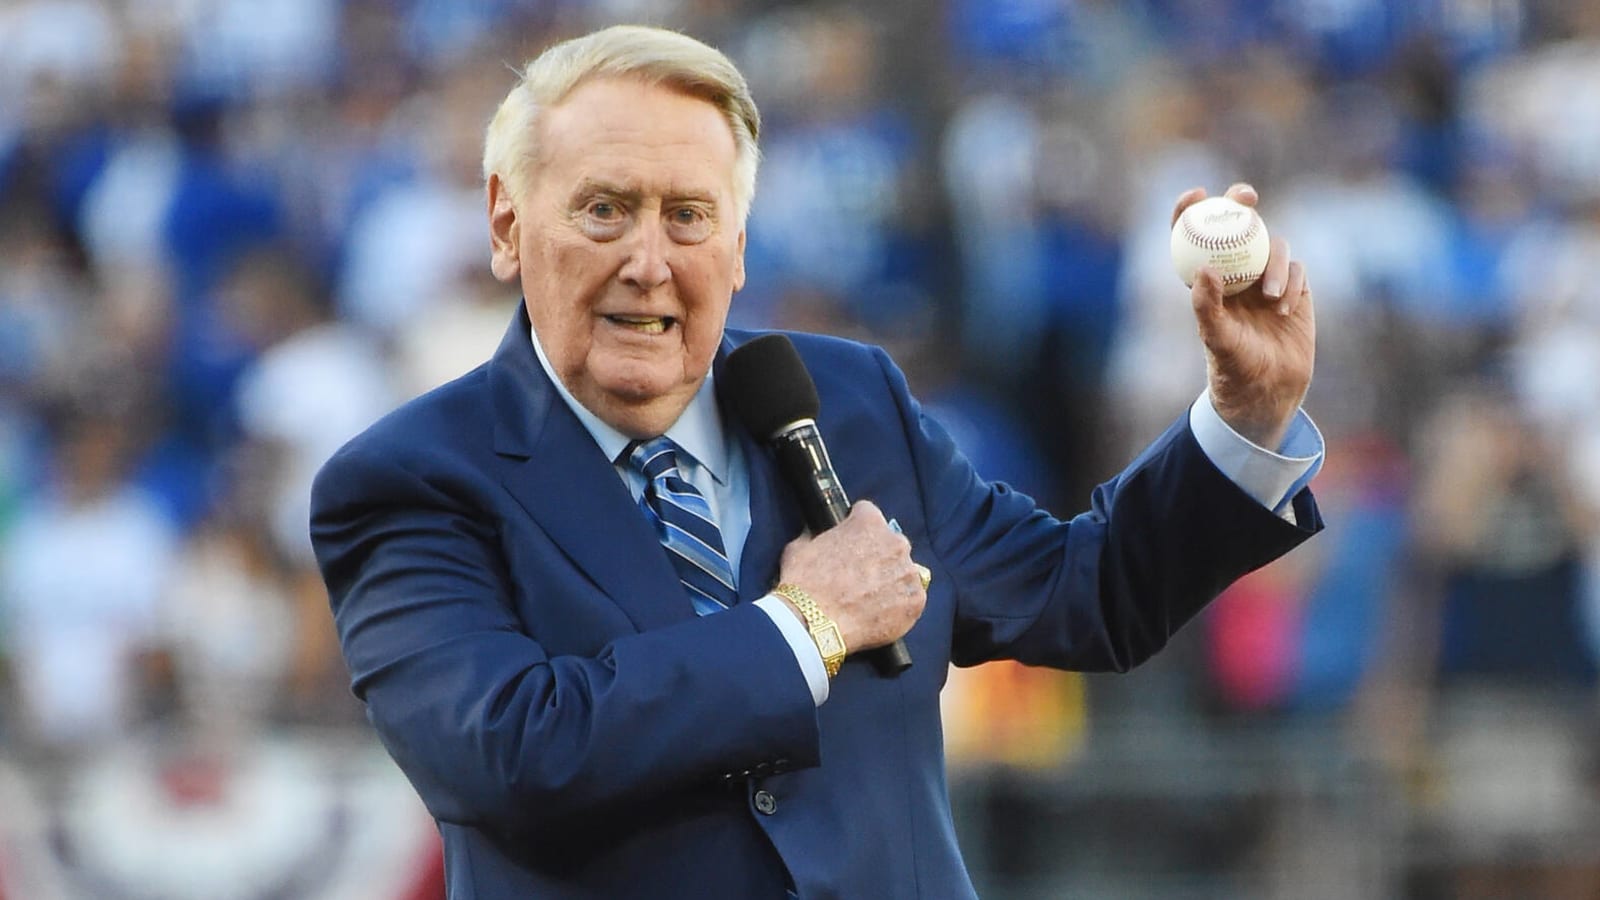 Dodgers honoring Vin Scully with microphone patch